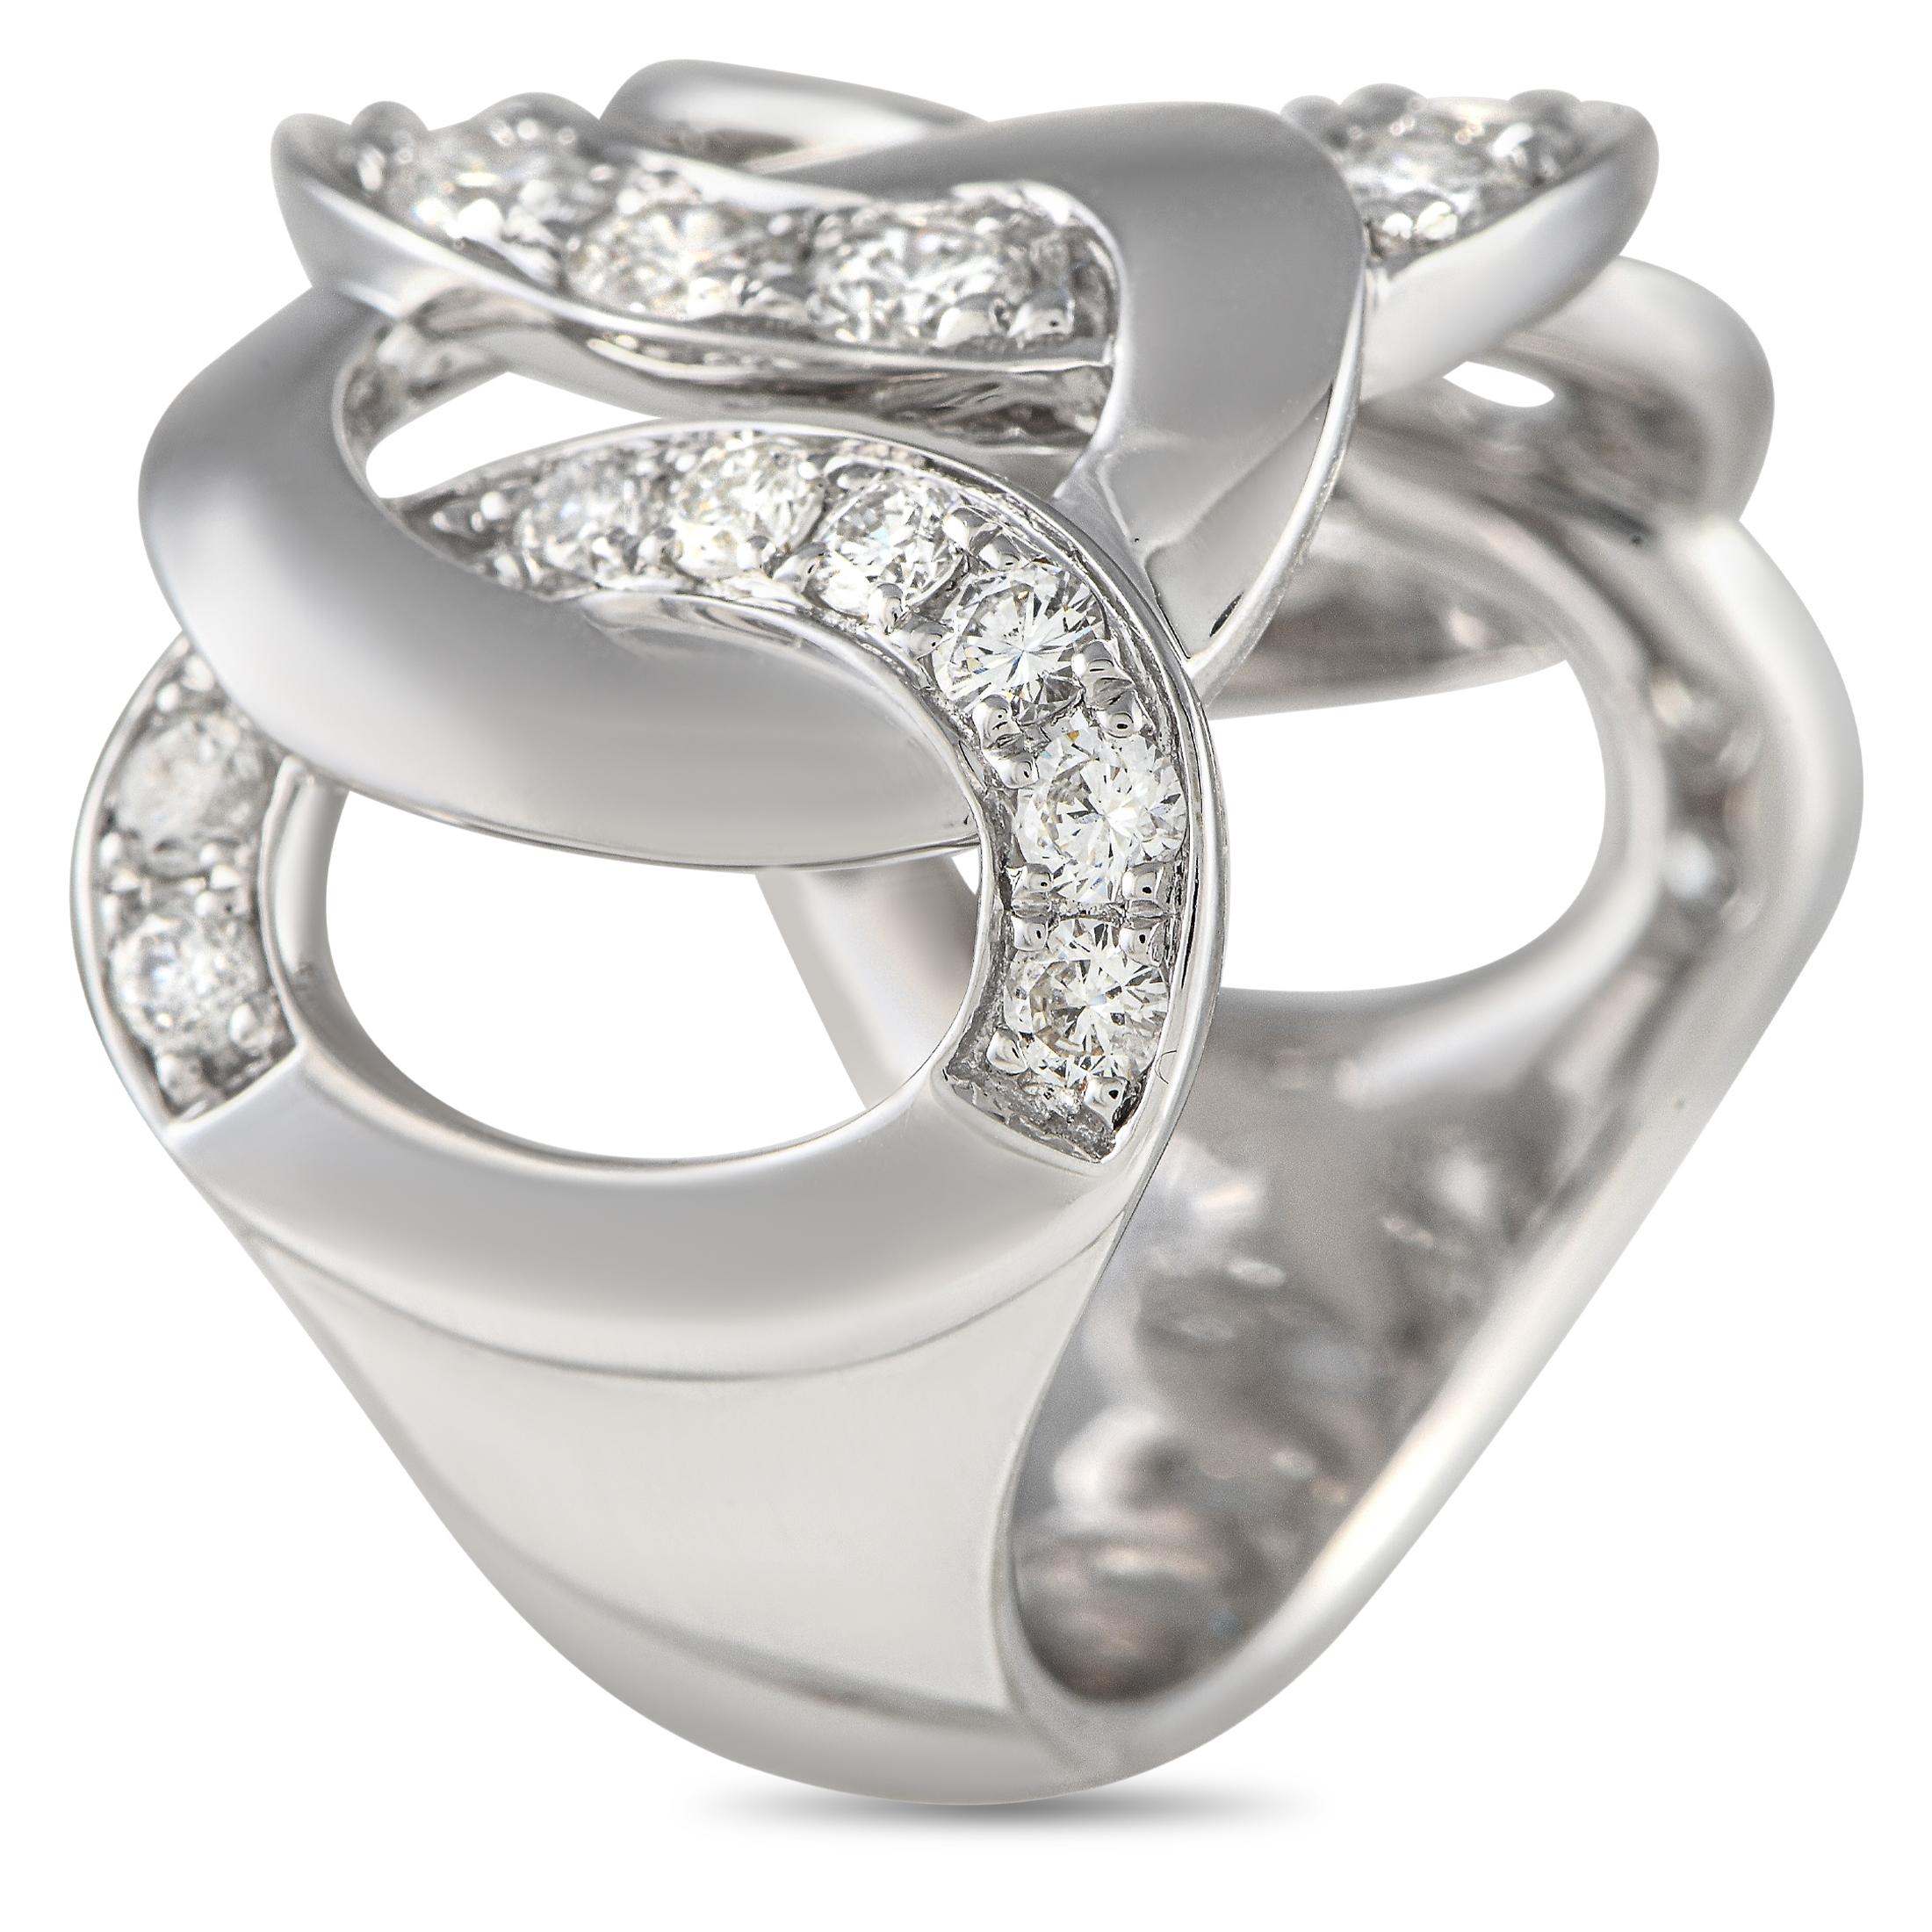 Cut-out accents add depth and dimension to this stylish 18K White Gold ring. The sleek setting is elevated by sparkling diamond accents, which possess a total weight of 1.50 carats. Ideal for any occasion, it features a 5mm wide band and an